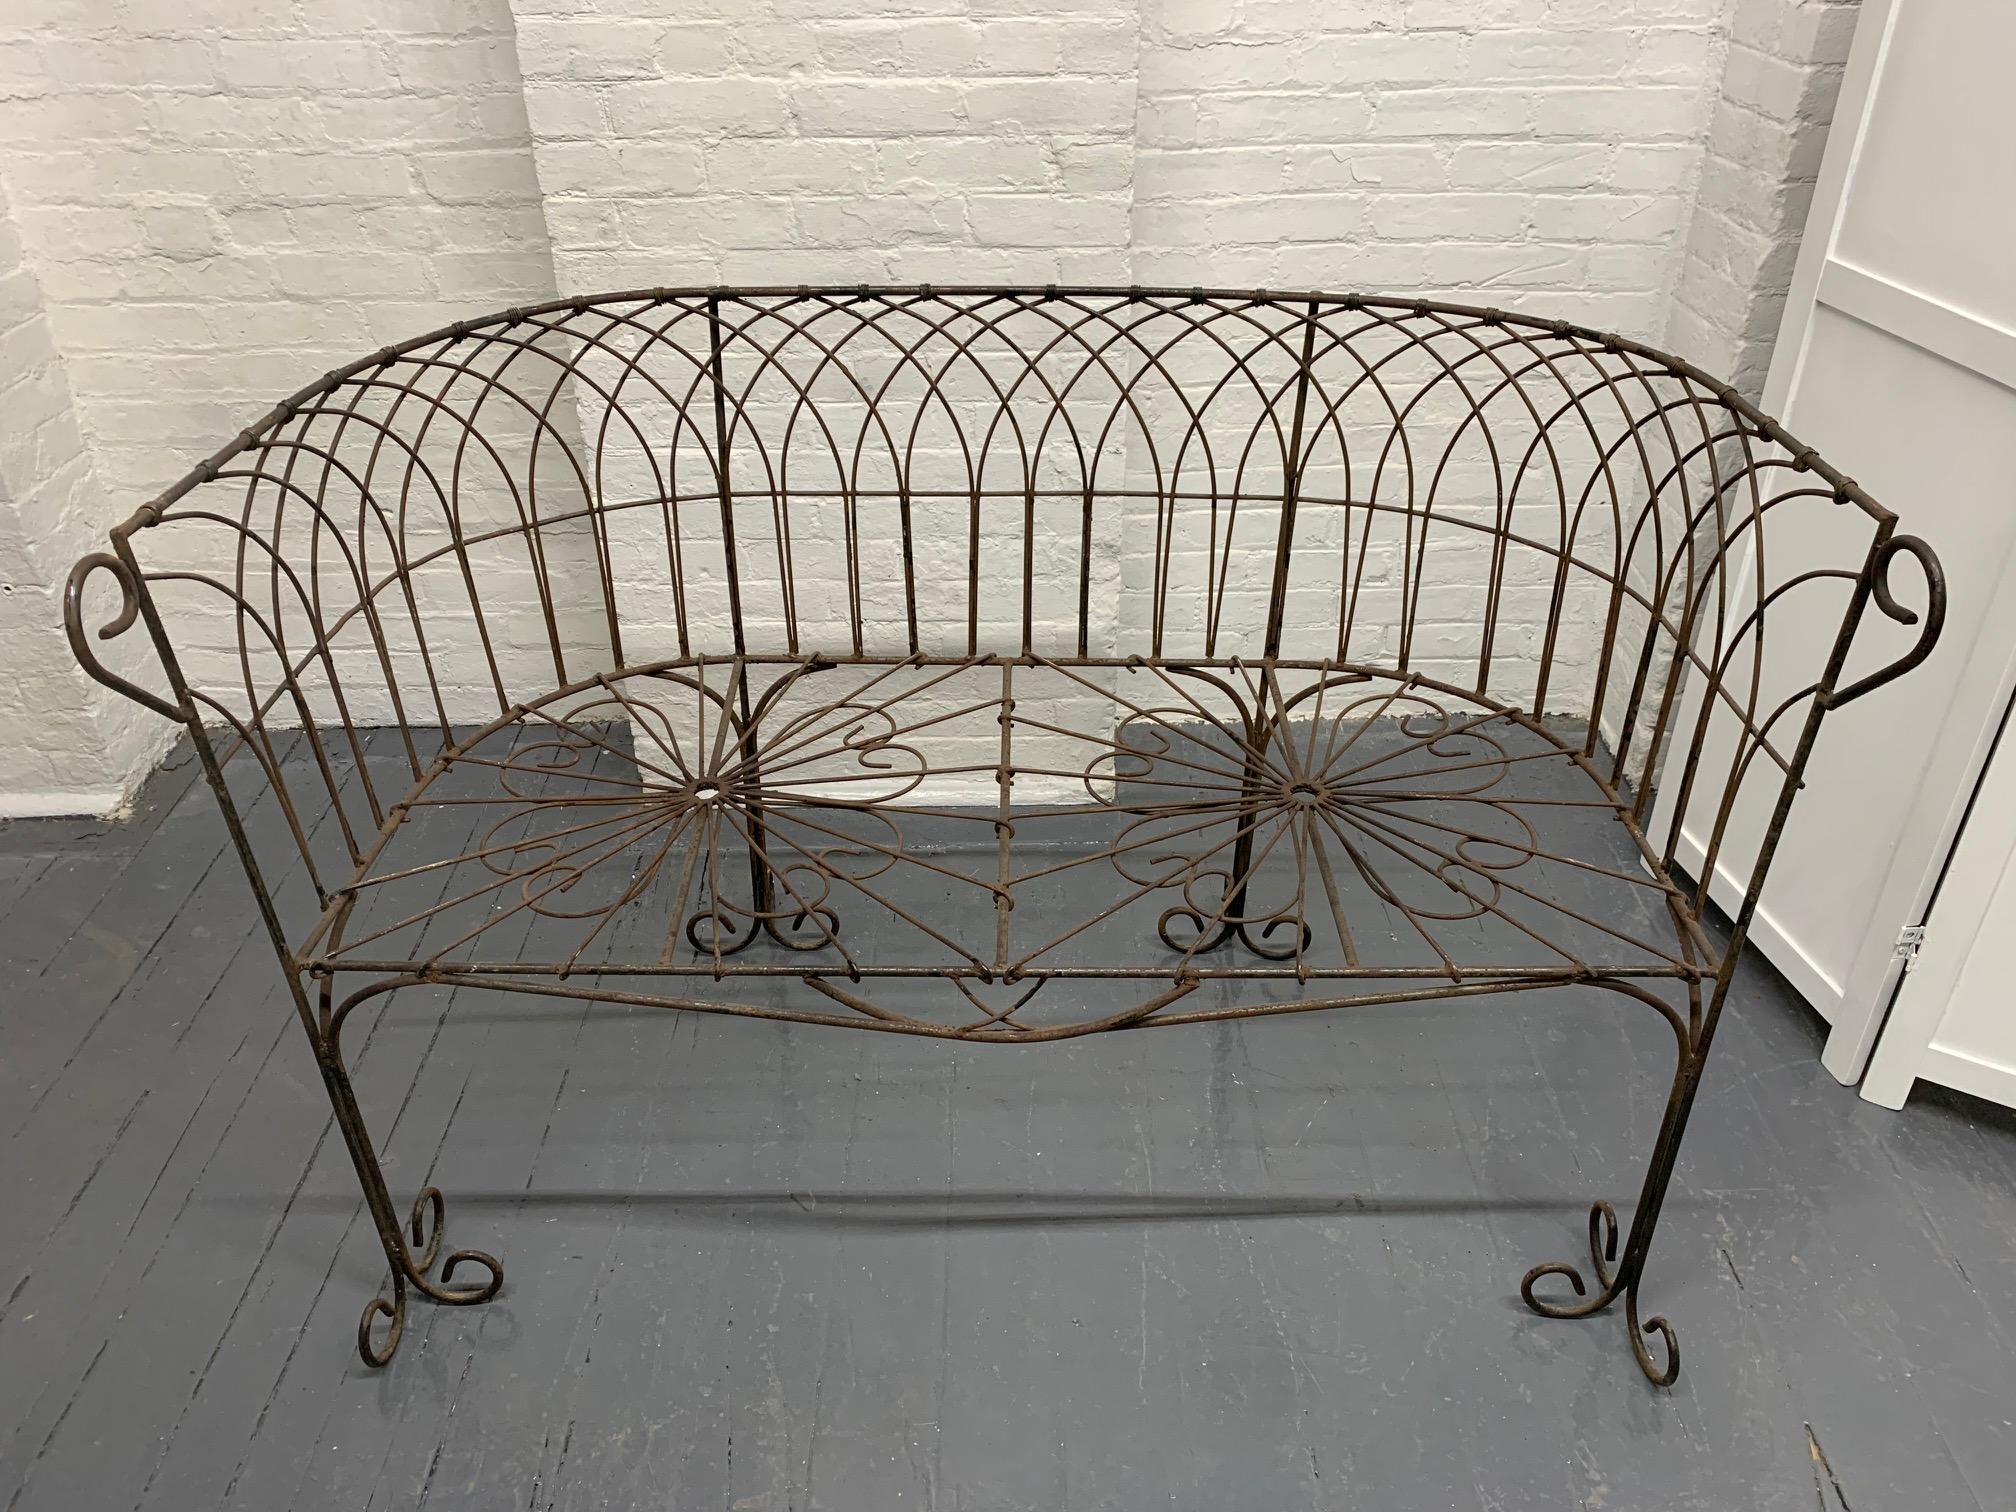 Lovely antique wrought iron bench with a beautiful pattern throughout the body.